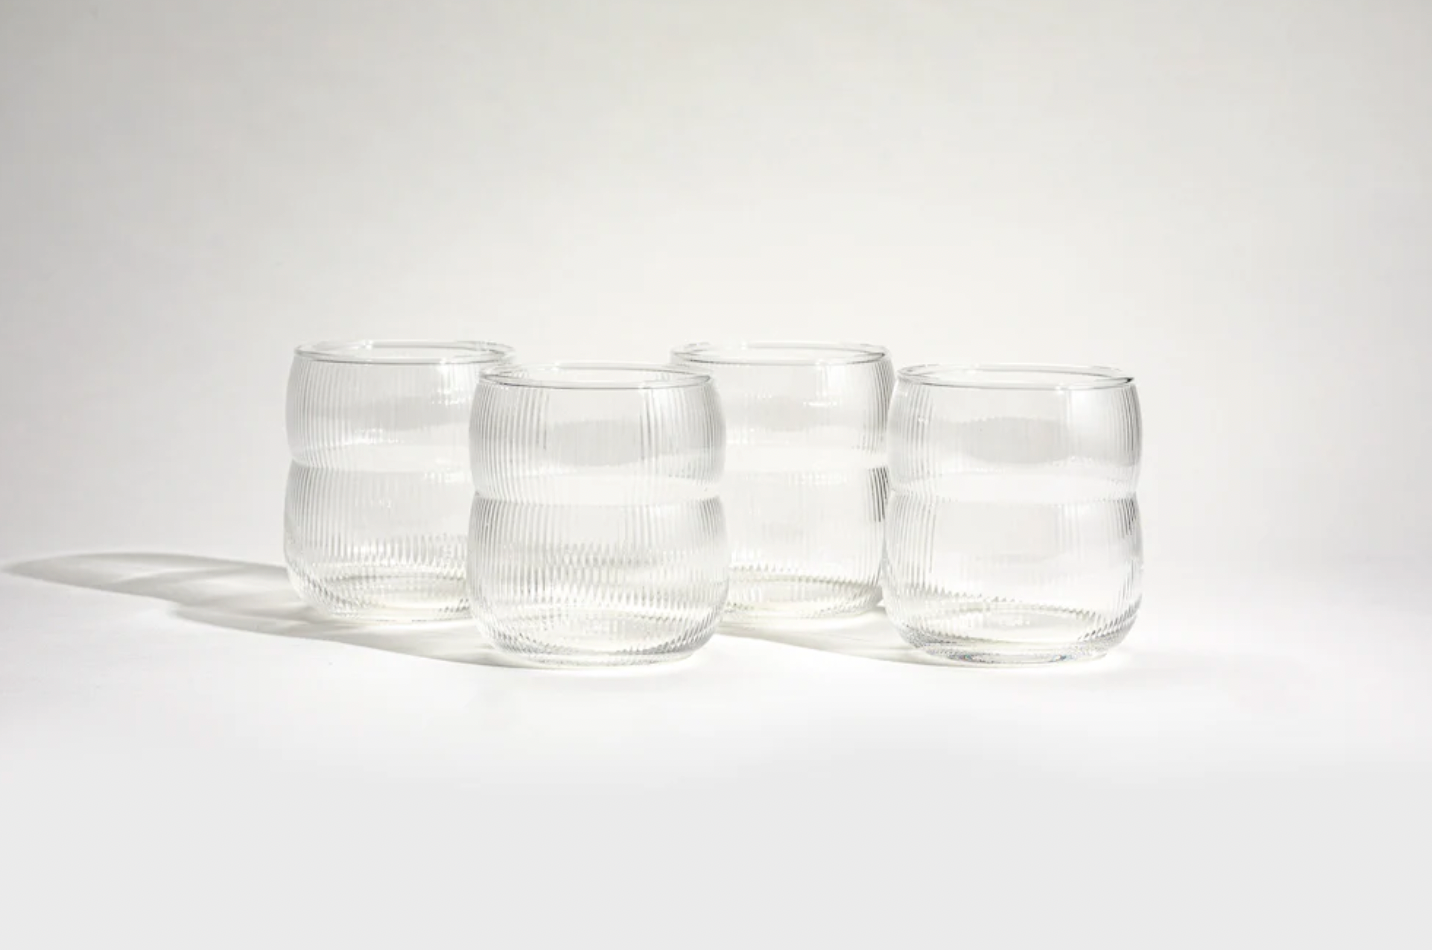 Product Image for The Everyday Glass, Clear (Set of 4)